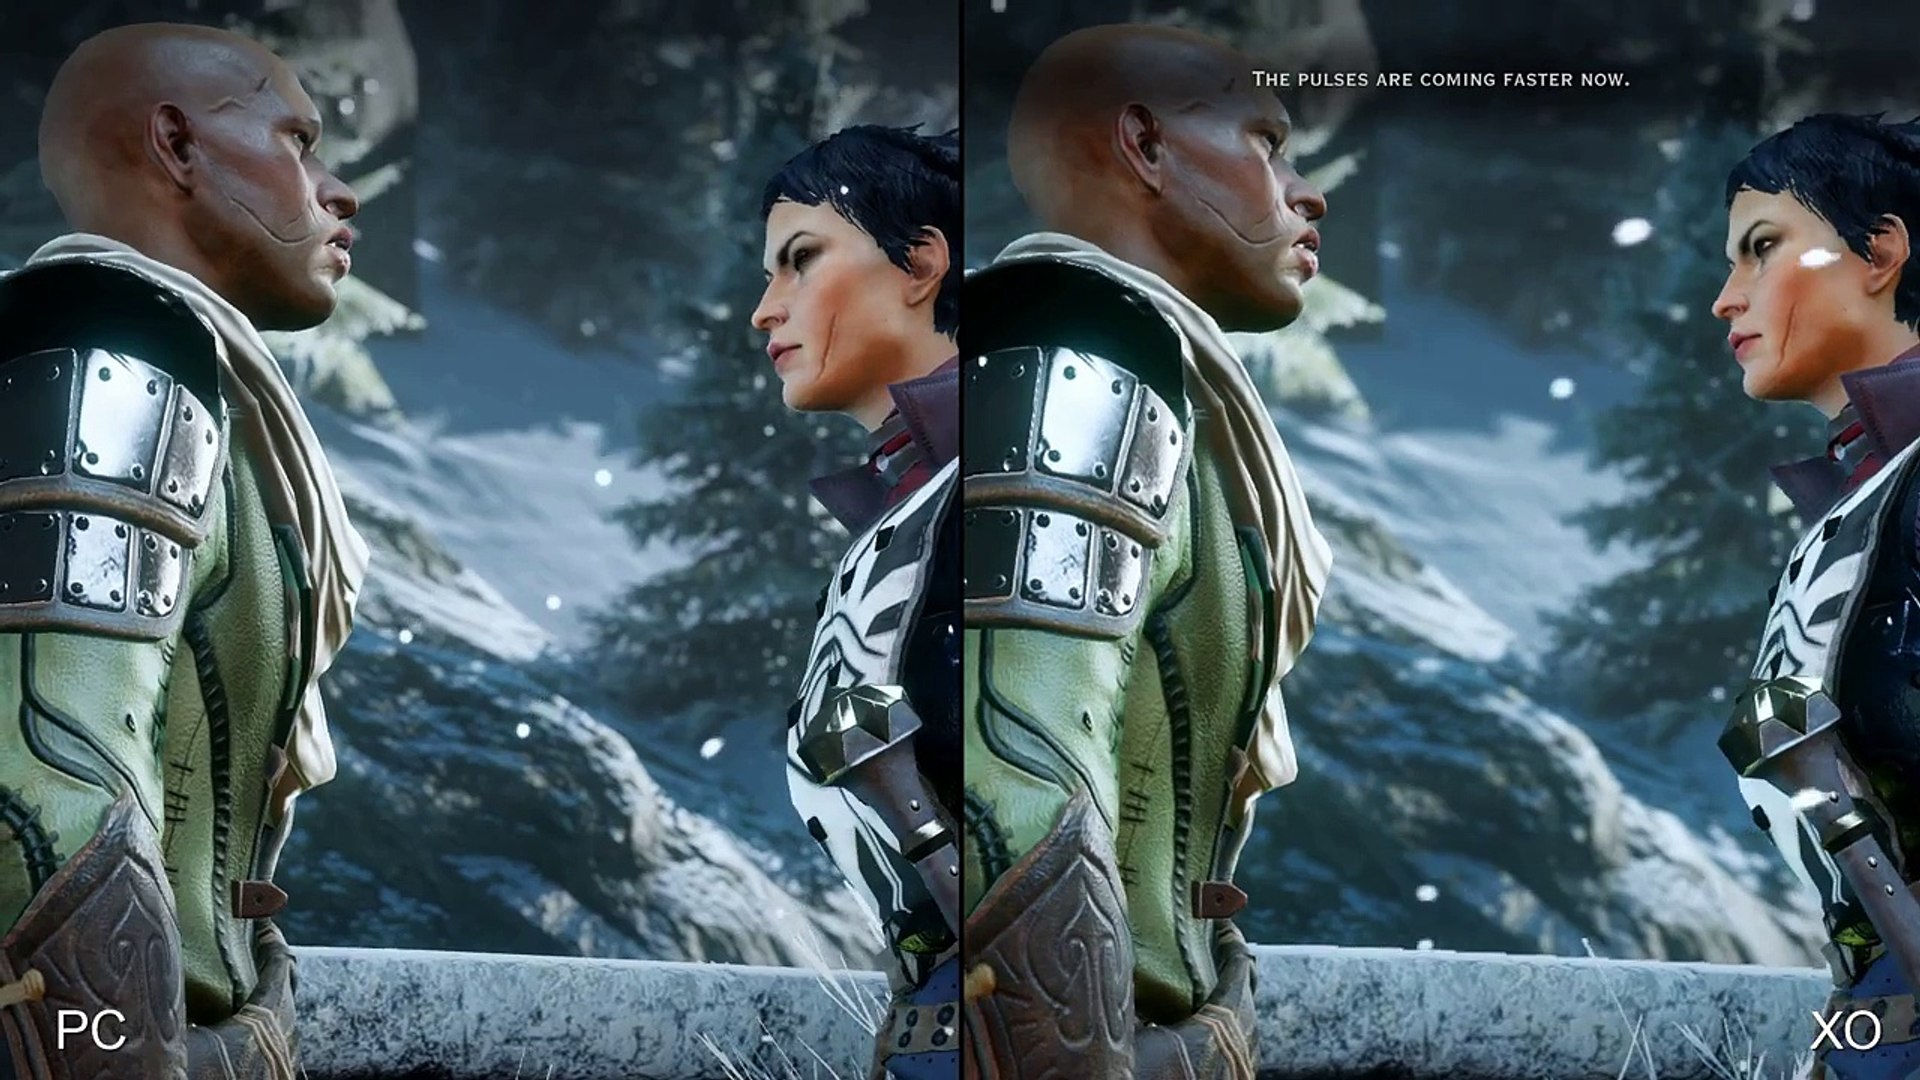 weduwe woede woestenij Dragon Age: Inquisition - Xbox One vs PC Comparison - video Dailymotion